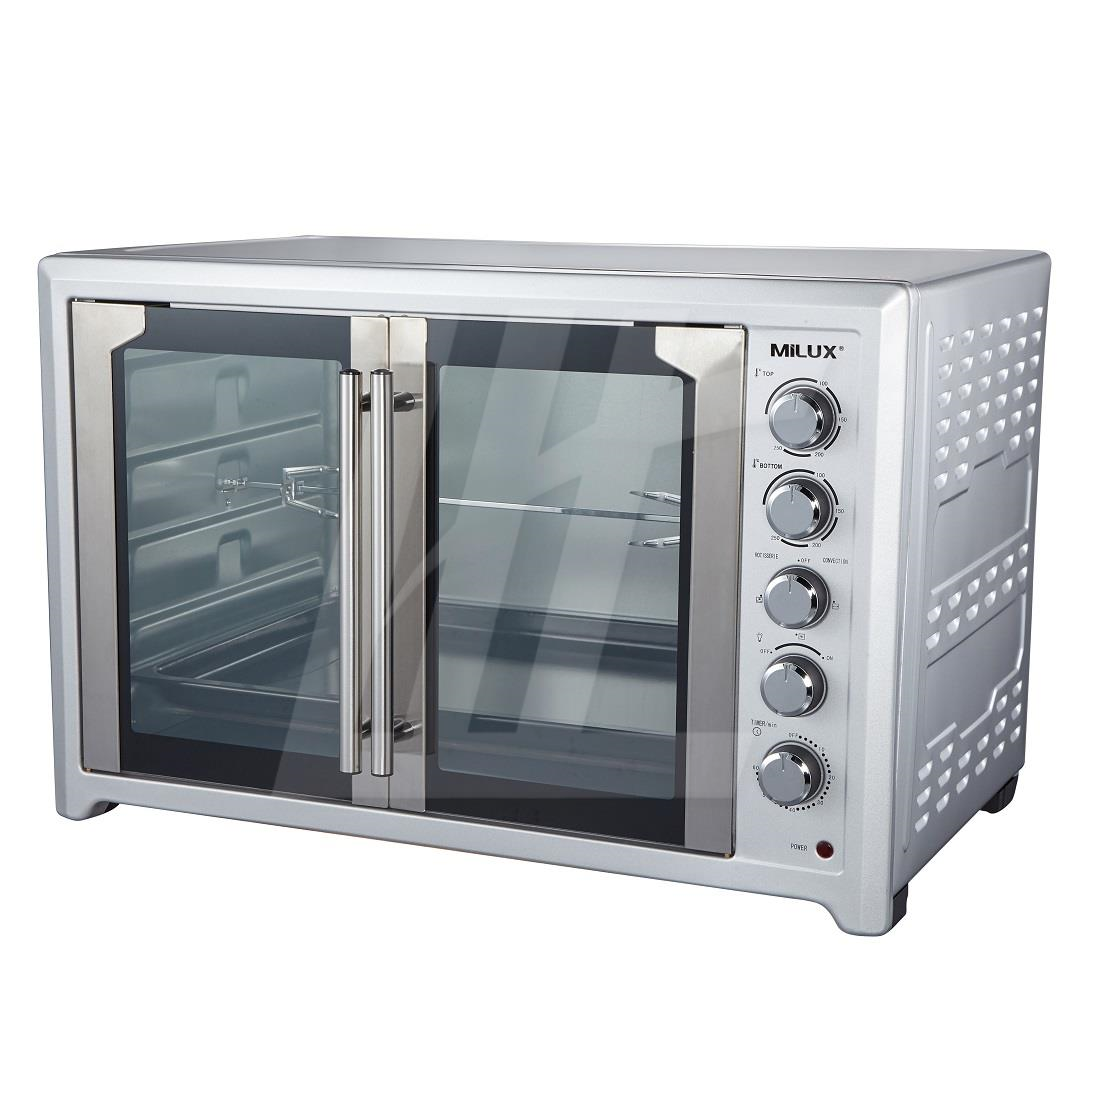 MILUX French Door Oven Side by Side Electric Oven